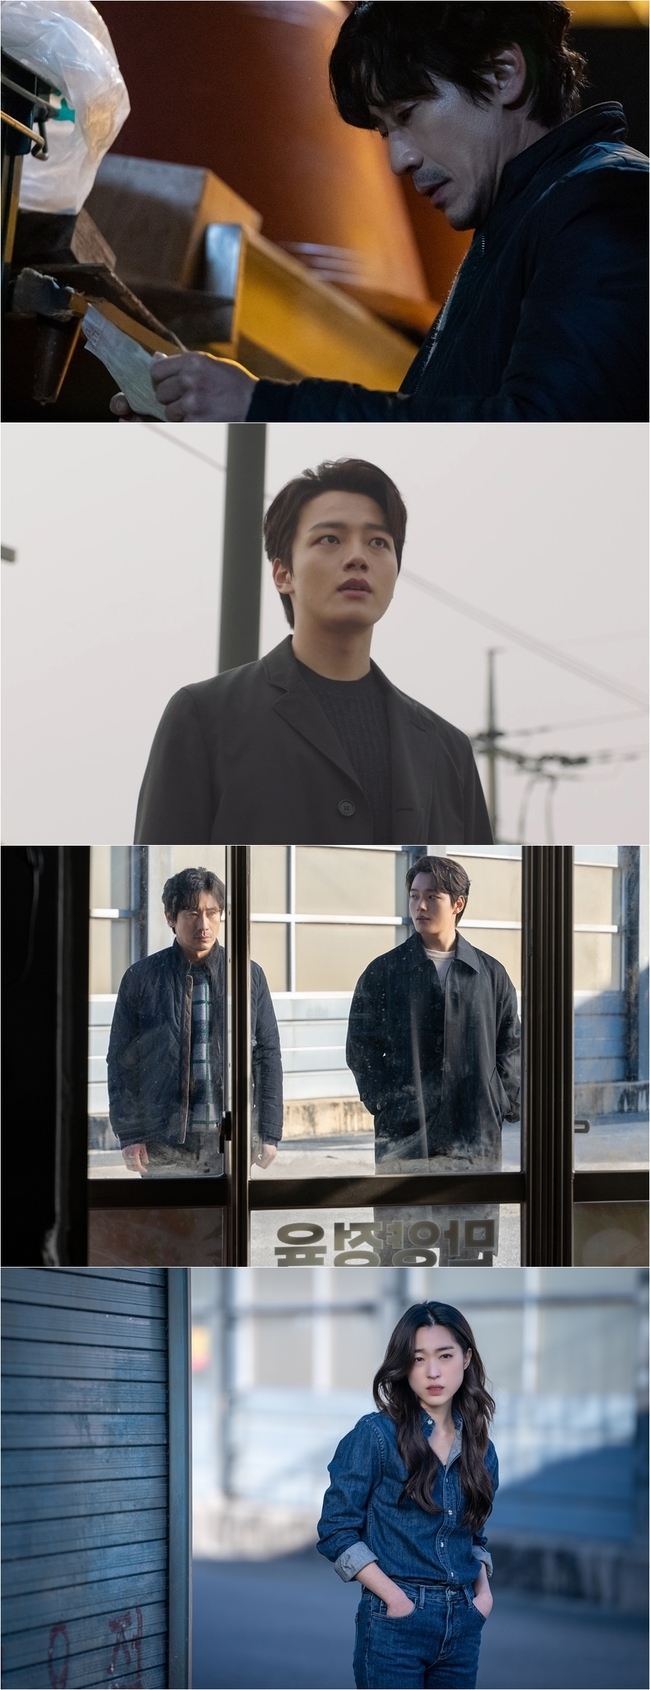 Shin Ha-kyun, Yeo Jin-goo relationship comes in reverseJTBC gilt drama Monster (playplayed by Kim Soo-jin/directed by Shim Na-yeon) unveiled the collaboration between dangerous partner Movesik (Shin Ha-kyun) and One (Yeo Jin-goo) on March 11.The two men are curious about why they found Yoo Jae-yi (Choi Sung-eun) in Manyang butcher shop.In the last broadcast, Jinbum, who killed Kang Min-jung (Kang Min-ae), was found to be his father Gangjin High School Muk (Lee Kyu-hoe), causing horrification.Even Gangjin High School approached One a week asking him to investigate the Kang Min-jung case he killed.One week accepted the move and predicted an unpredictable development. An unexpected incident broke out.The dead Kang Min-jungs cell phone signal was caught. The letter Dad, get me out arrived at Gangjin High School.While truth and lies are endlessly overturned and heightening mysteries, changes also come to the relationship between Move and One.Move-style, who found a map of doubt behind the manyang butcher shop building in the public photo, is confused.Movesik, who was angry at Oh Ji-hoon (Nam Yoon-soo), had left his seat and headed here. Kang Min-jungs cell phone, which died, was turned on and the confusion was added.What is the map found by Move, and what secrets are hidden between the old piles of furniture.It is also interesting to see One in the week when he started to re-examine the Kang Min-jung case at the request of Gangjin High School.One week of discovering CCTVs that illuminate the Manyang Super Plains. His eyes, which realize something, make him guess his change.Move and One in front of the manyang butcher shop were also captured.The complex face of Move and the contrasting expression of One, who stares at him keenly, stimulates curiosity.